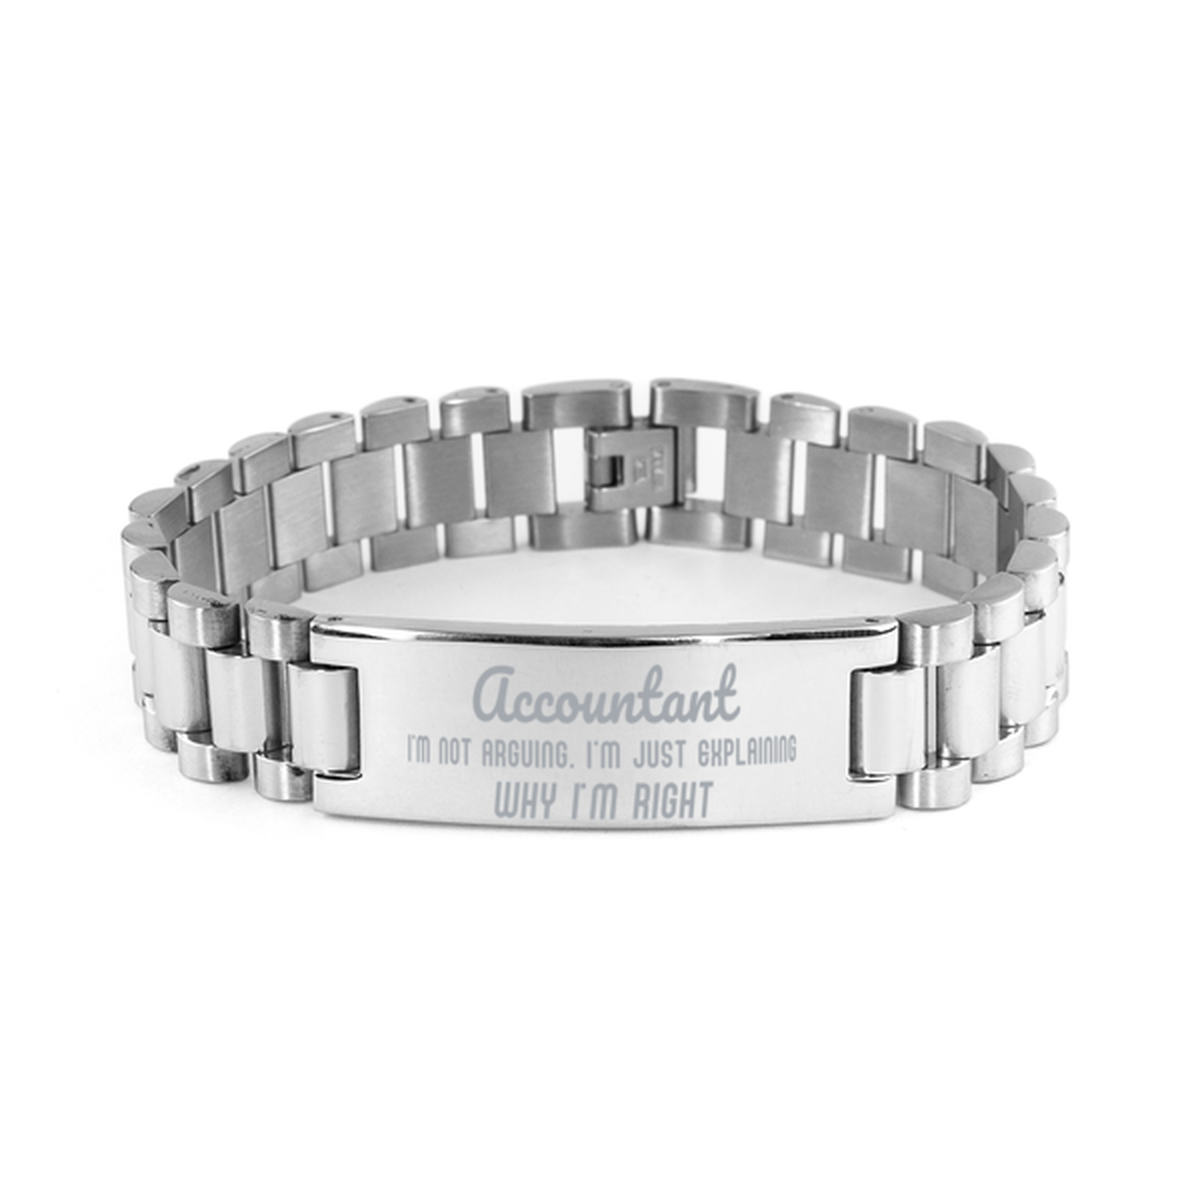 Accountant I'm not Arguing. I'm Just Explaining Why I'm RIGHT Ladder Stainless Steel Bracelet, Graduation Birthday Christmas Accountant Gifts For Accountant Funny Saying Quote Present for Men Women Coworker